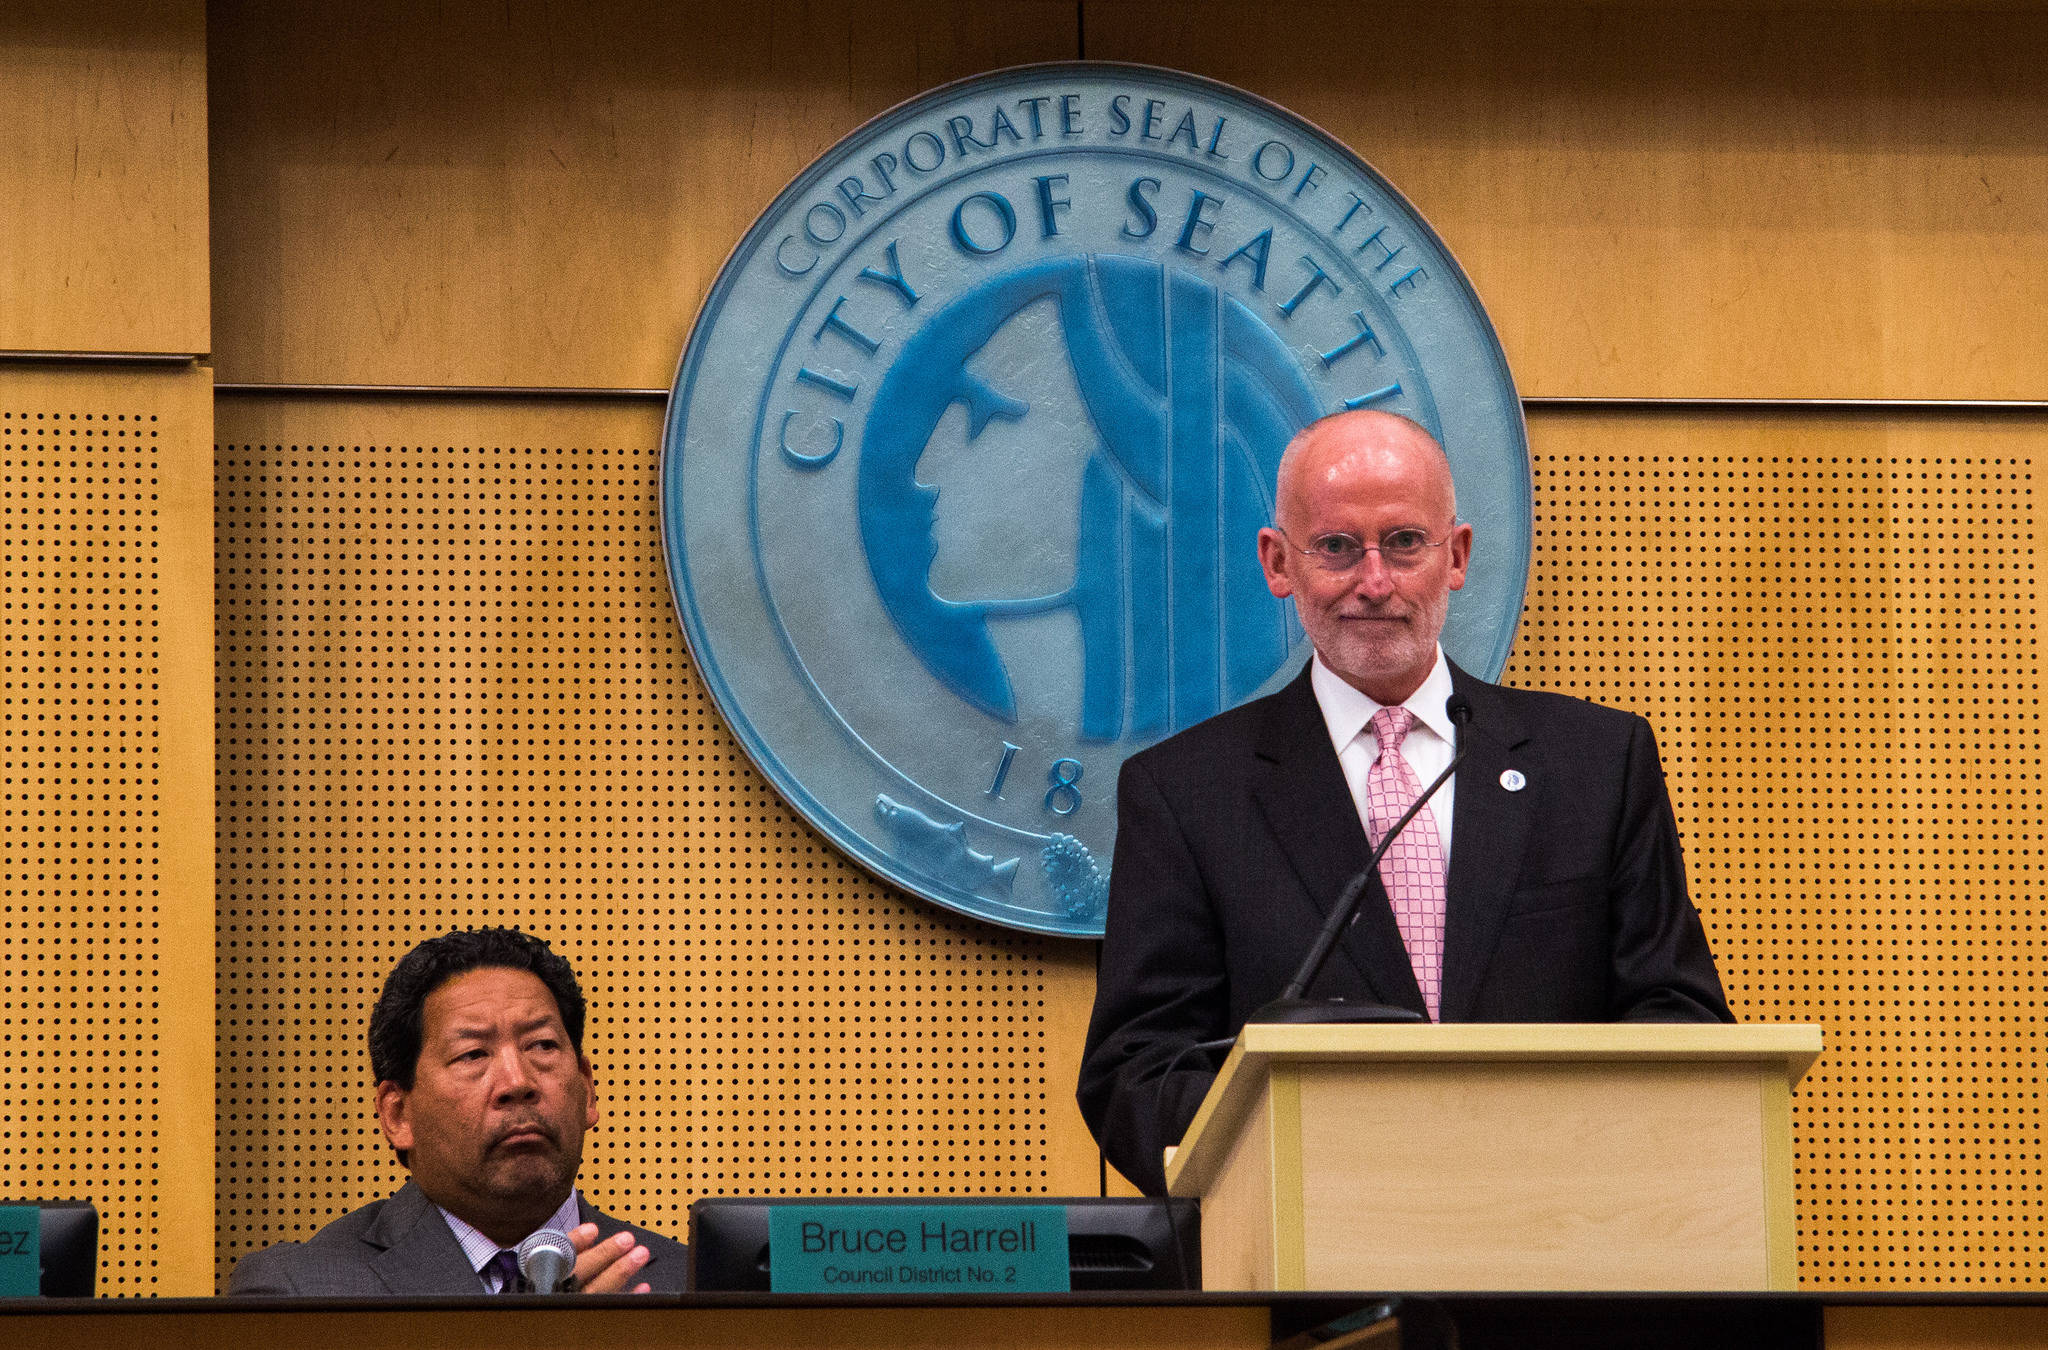 Council President Bruce Harrell (left) listens to interim mayor Tim Burgess present his proposed city budget. Photo by Joseph Peha, courtesy of Seattle City Council